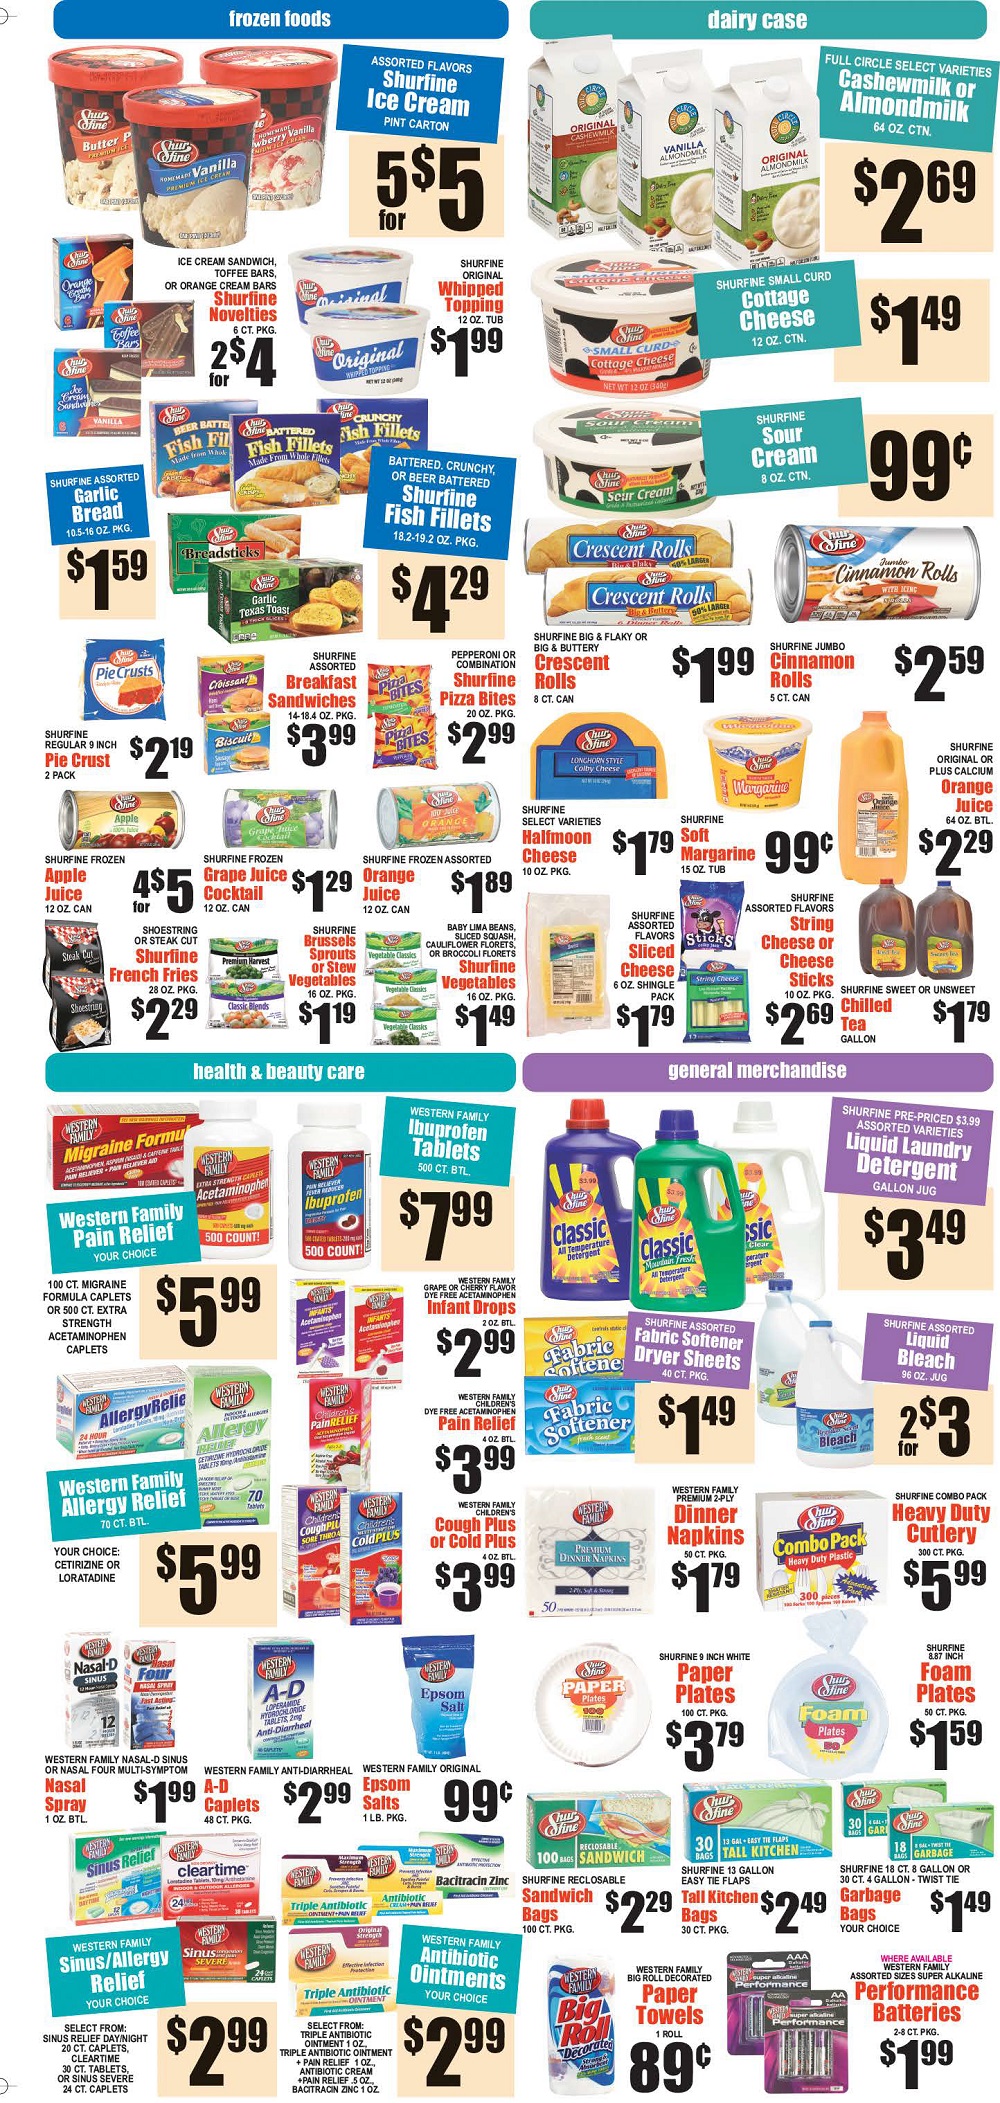 weekly-sales-for-sept-28th-oct-4th-pg-2